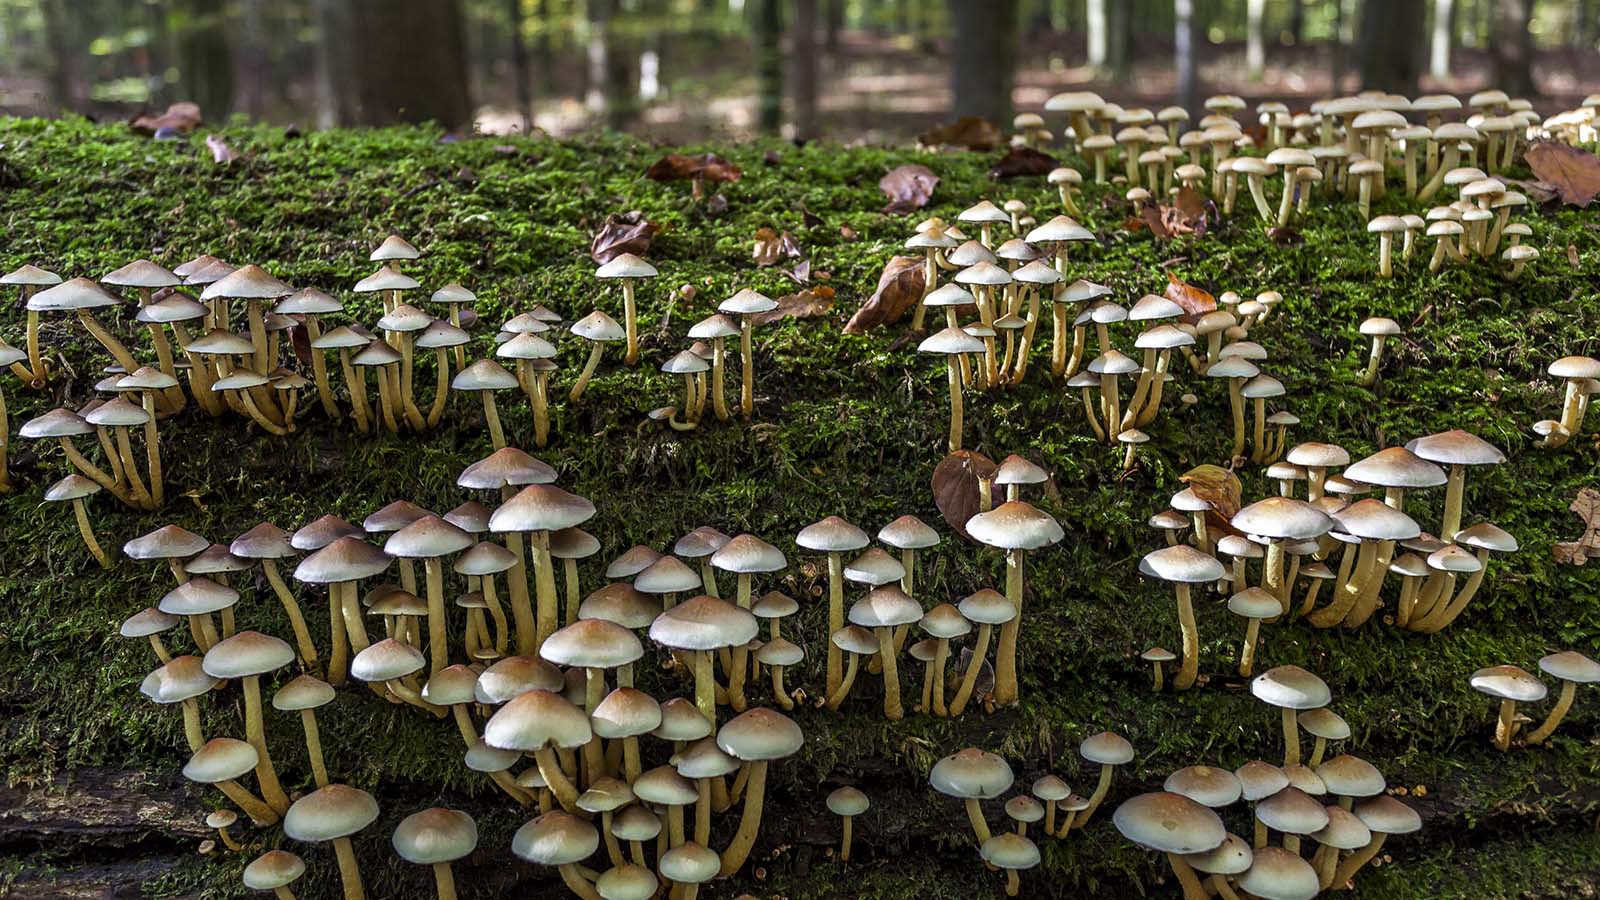 Can Mushrooms Surely Abet Assign the Planet?